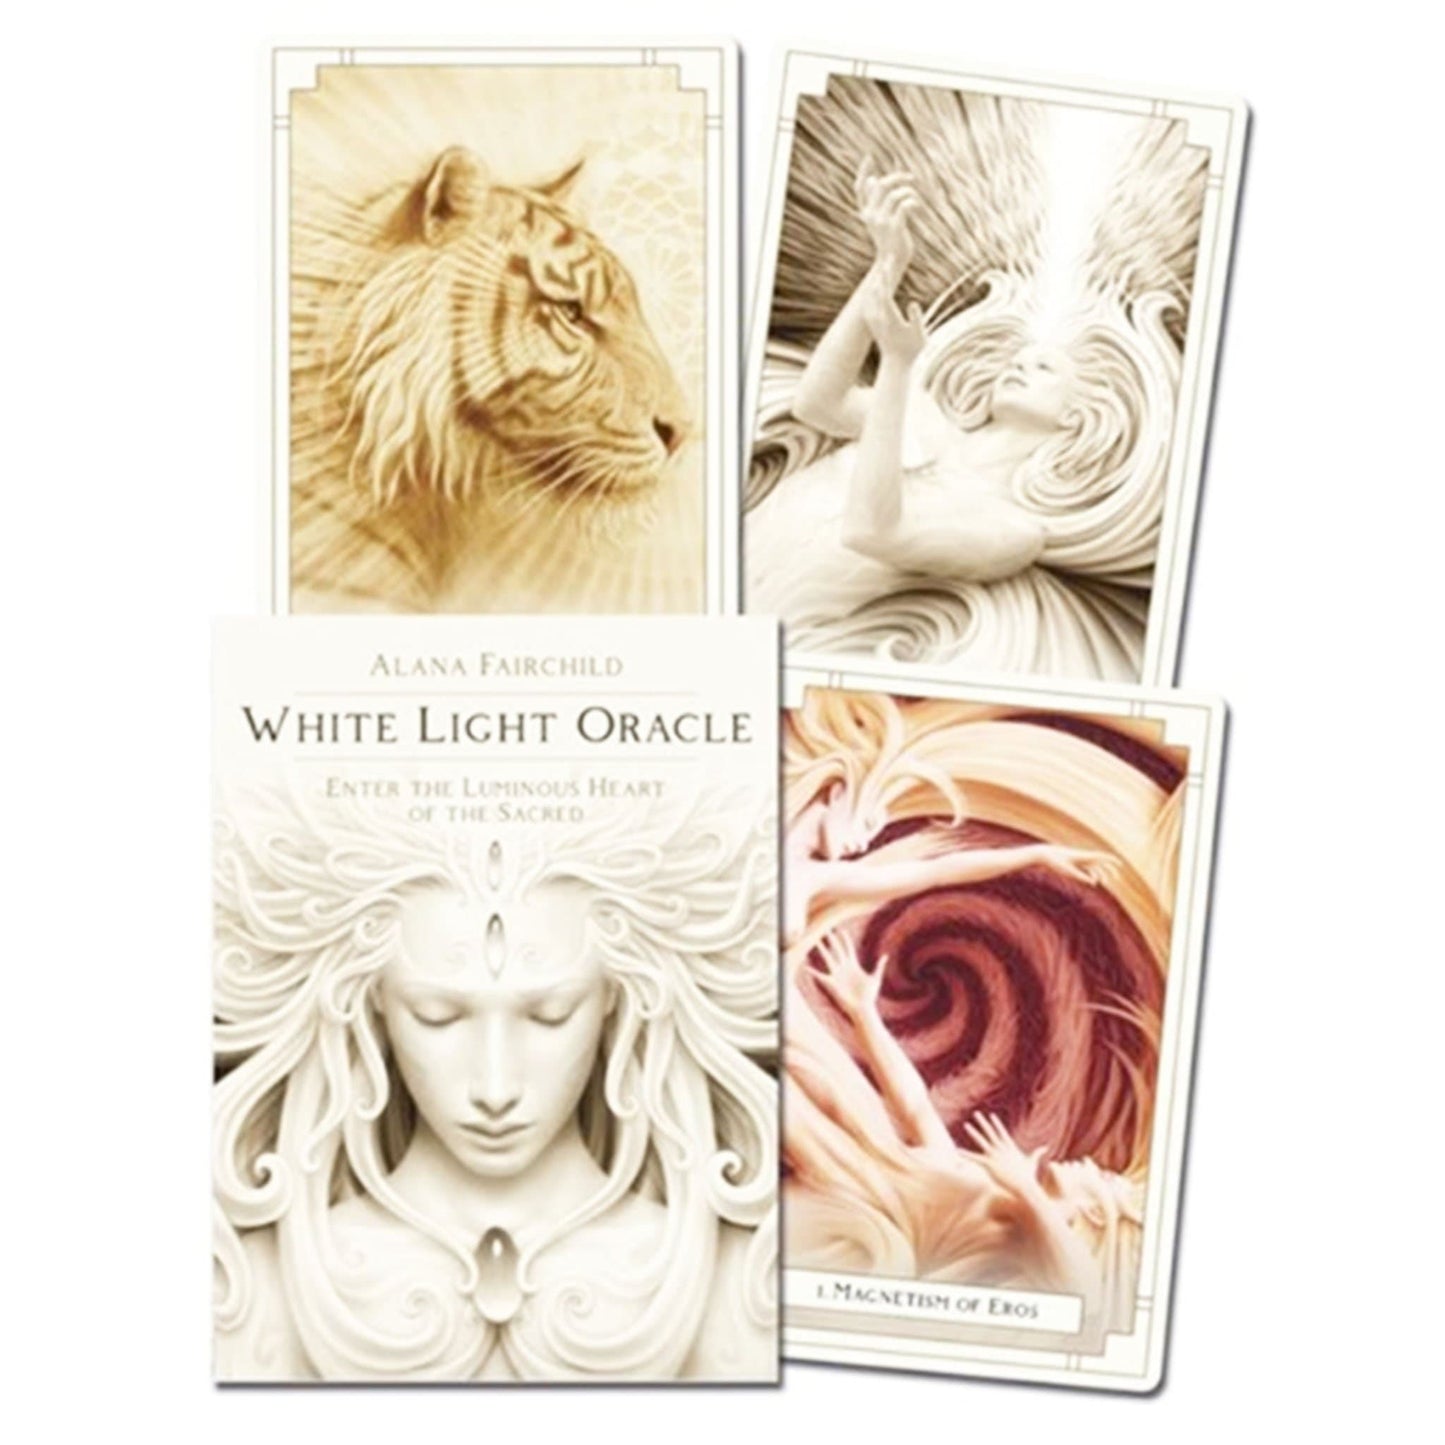 White Light Oracle: Enter The Luminous Heart Of The Sacred by Alana Fairchild - Muse + Moonstone